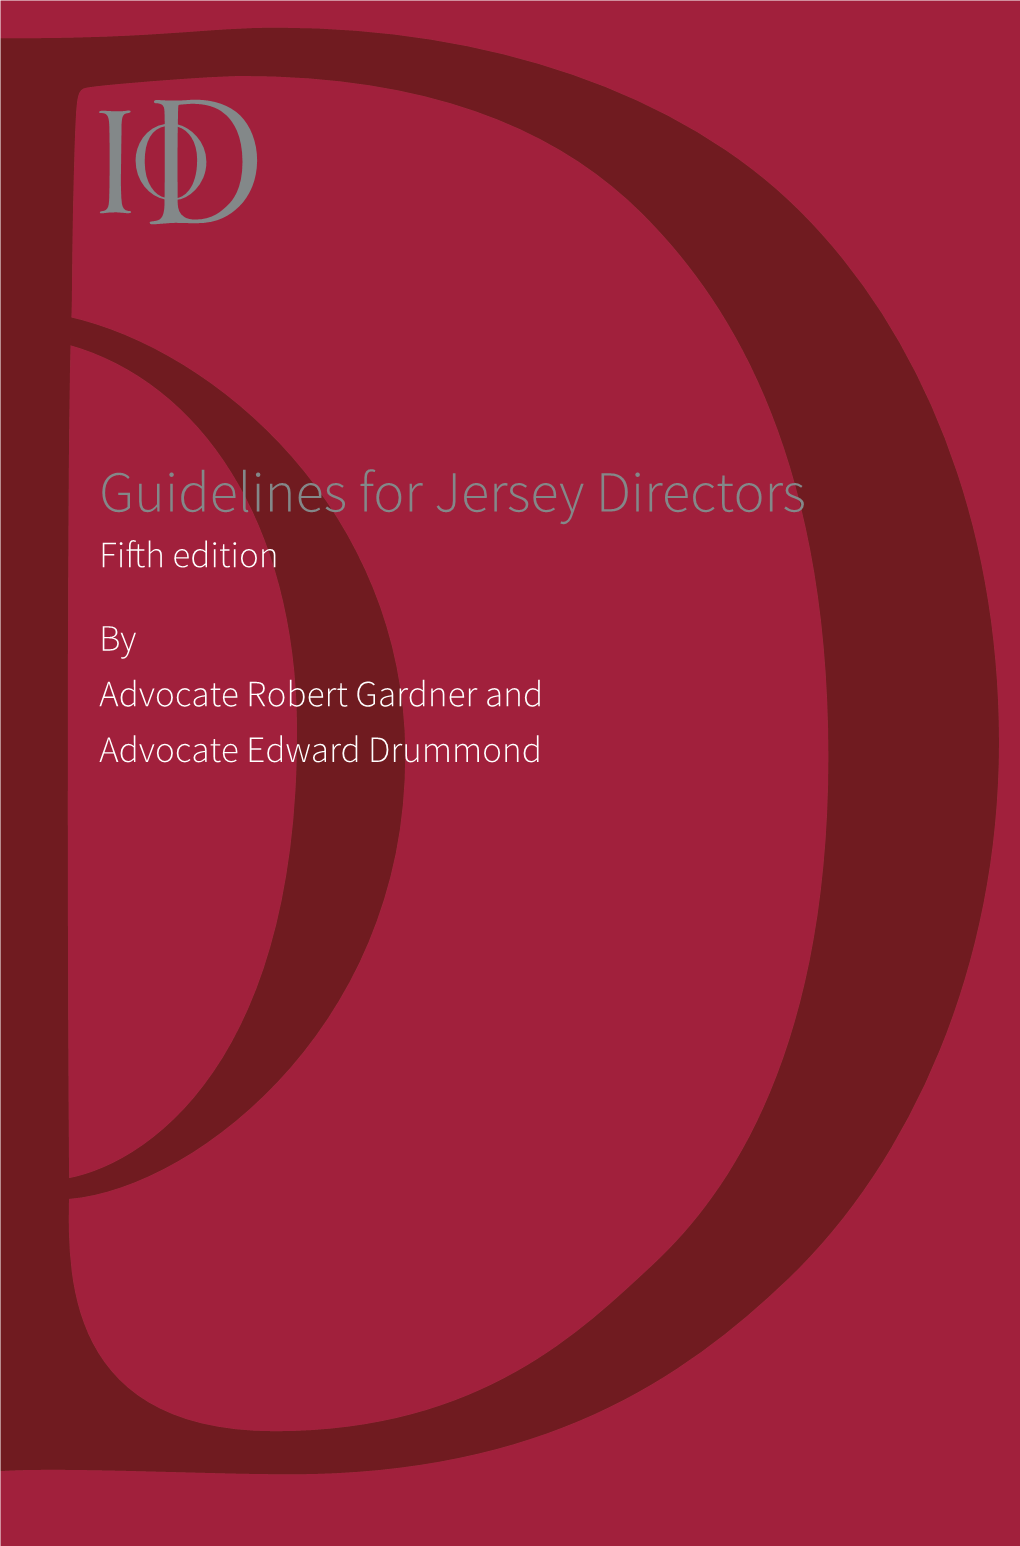 Guidelines for Jersey Directors Fifth Edition